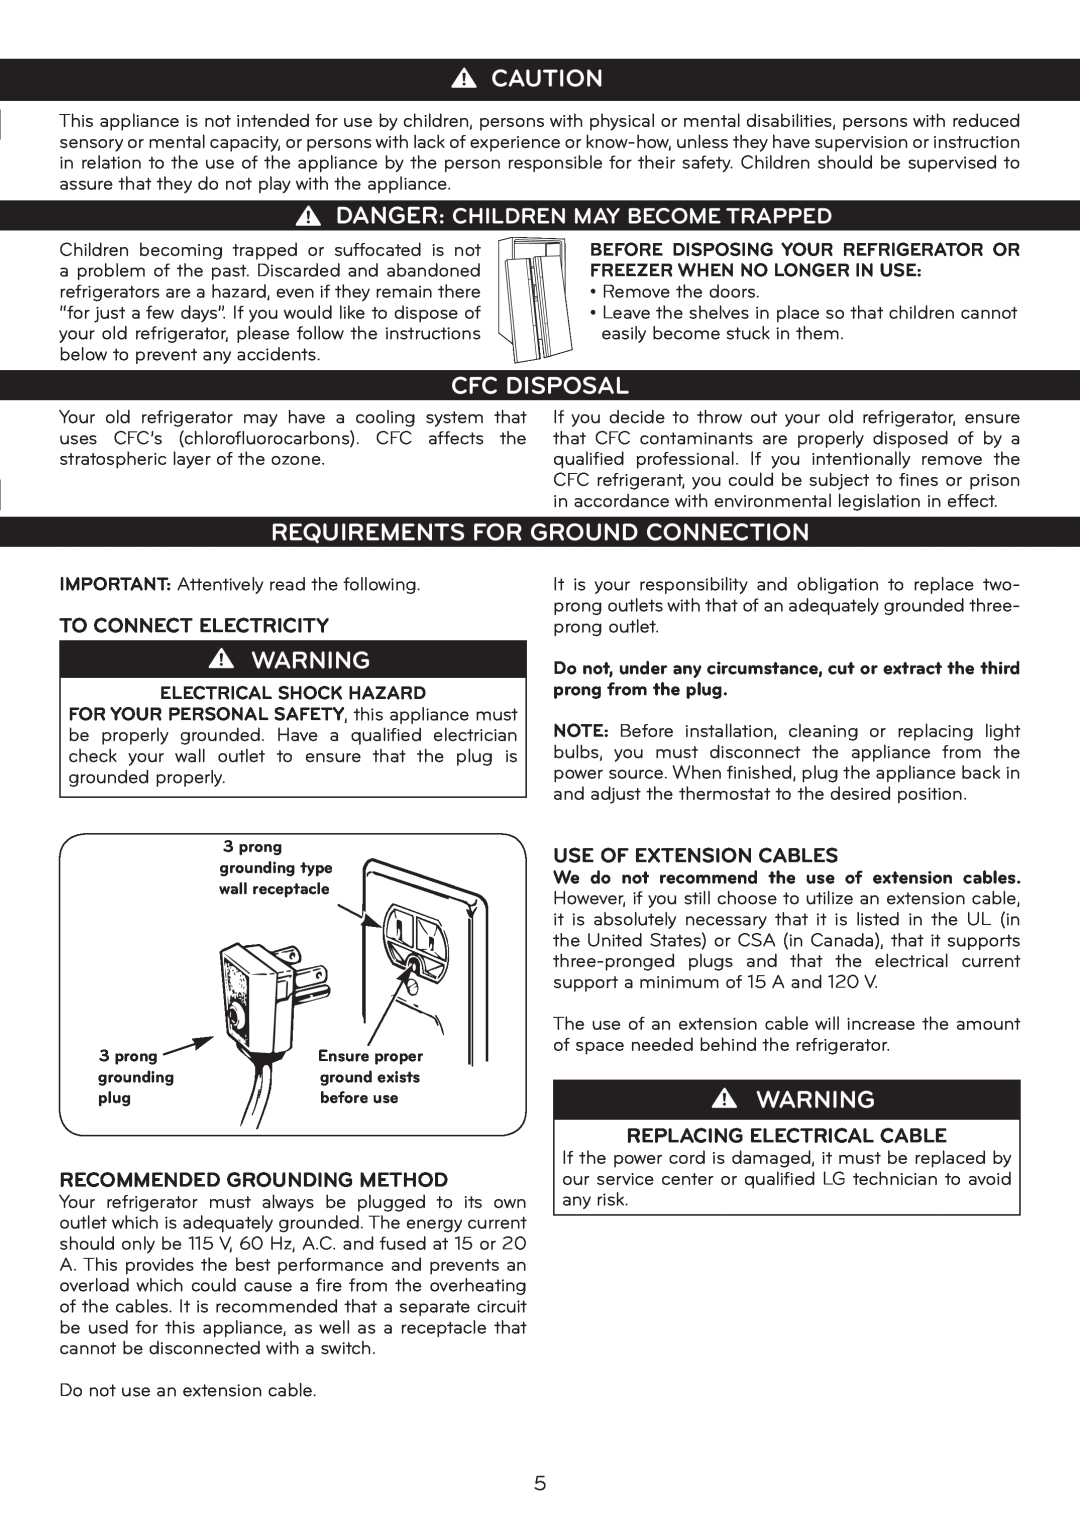 LG Electronics LSC27925**, LSC27925ST owner manual Cfc Disposal, Requirements For Ground Connection, To Connect Electricity 